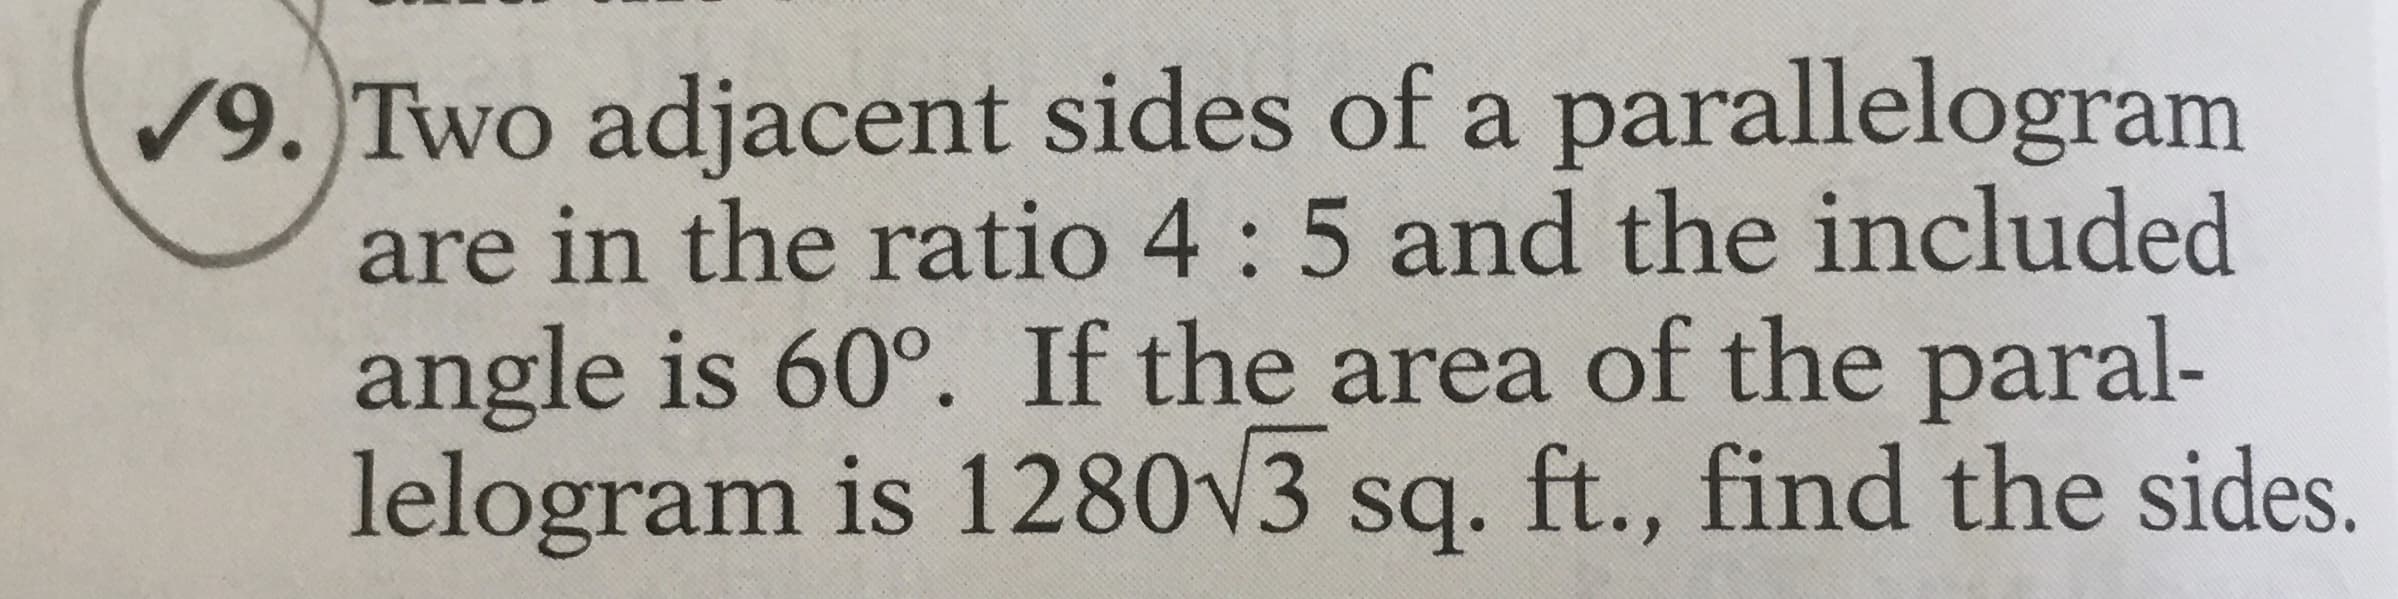 /9. Two adjacent sides of a parallelogram
are in the ratio 4 : 5 and the included
angle is 60°. If the area of the paral-
lelogram is 1280V3 sq. ft., find the sides.
